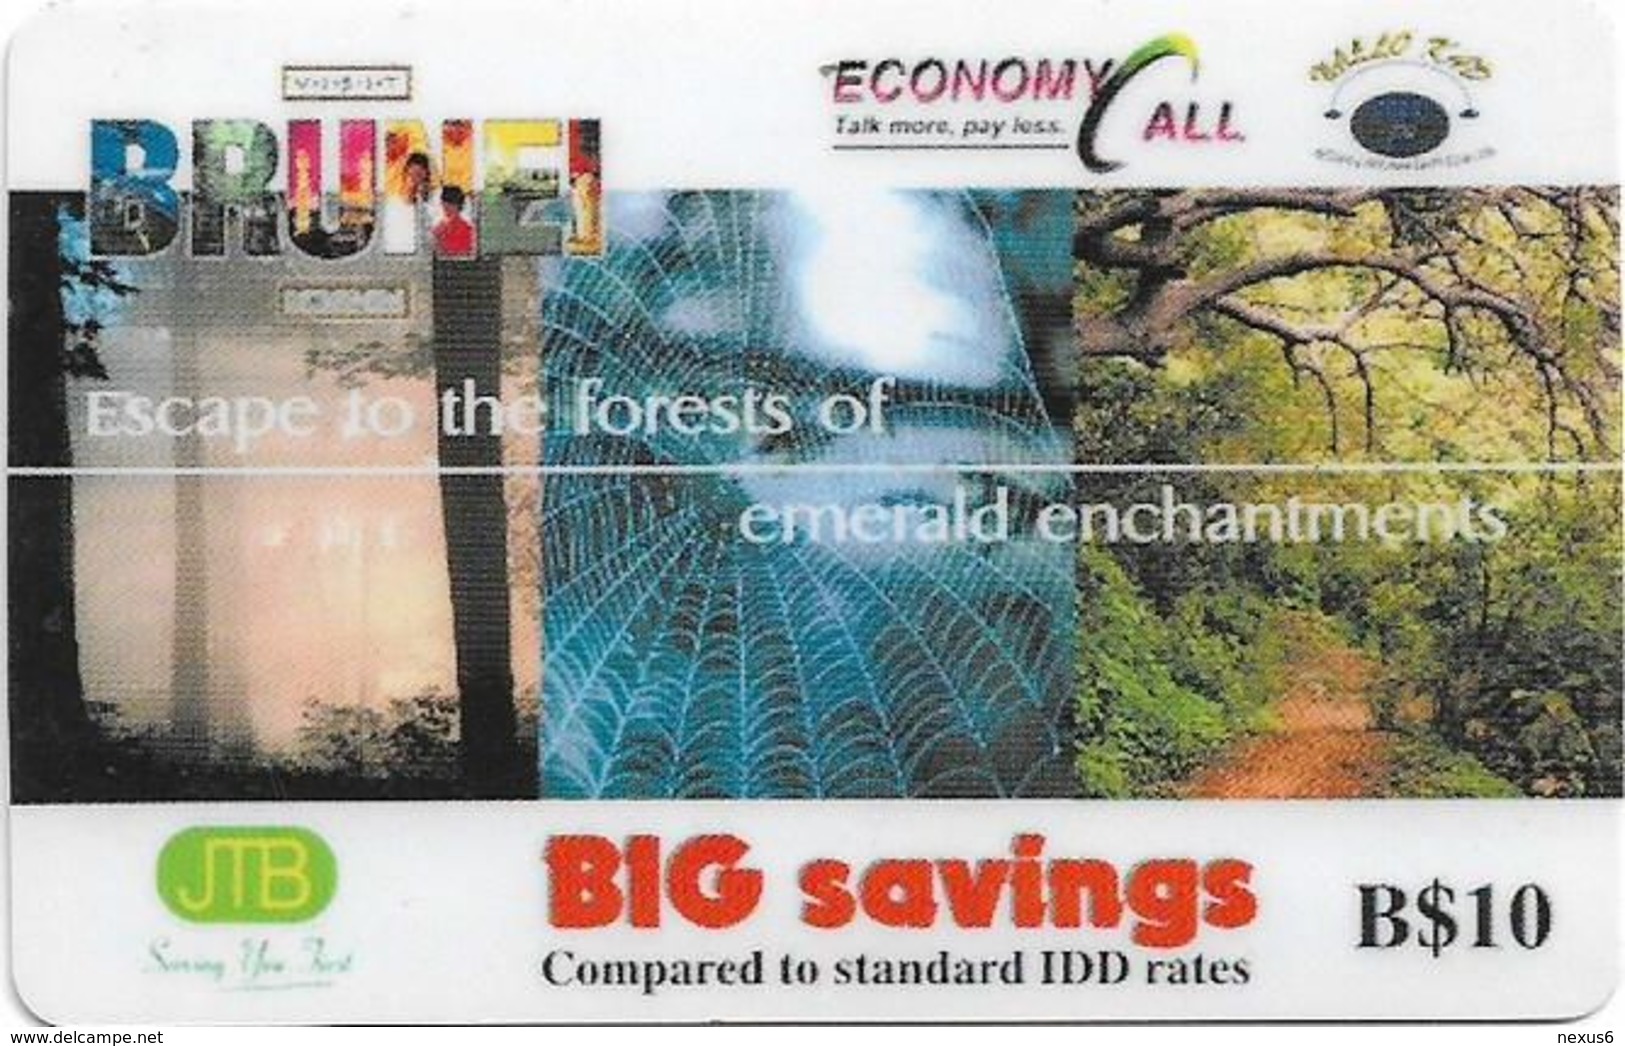 Brunei - JTB - Escape To The Forests Of Emerald Enchantments, Prepaid 10$, Used - Brunei